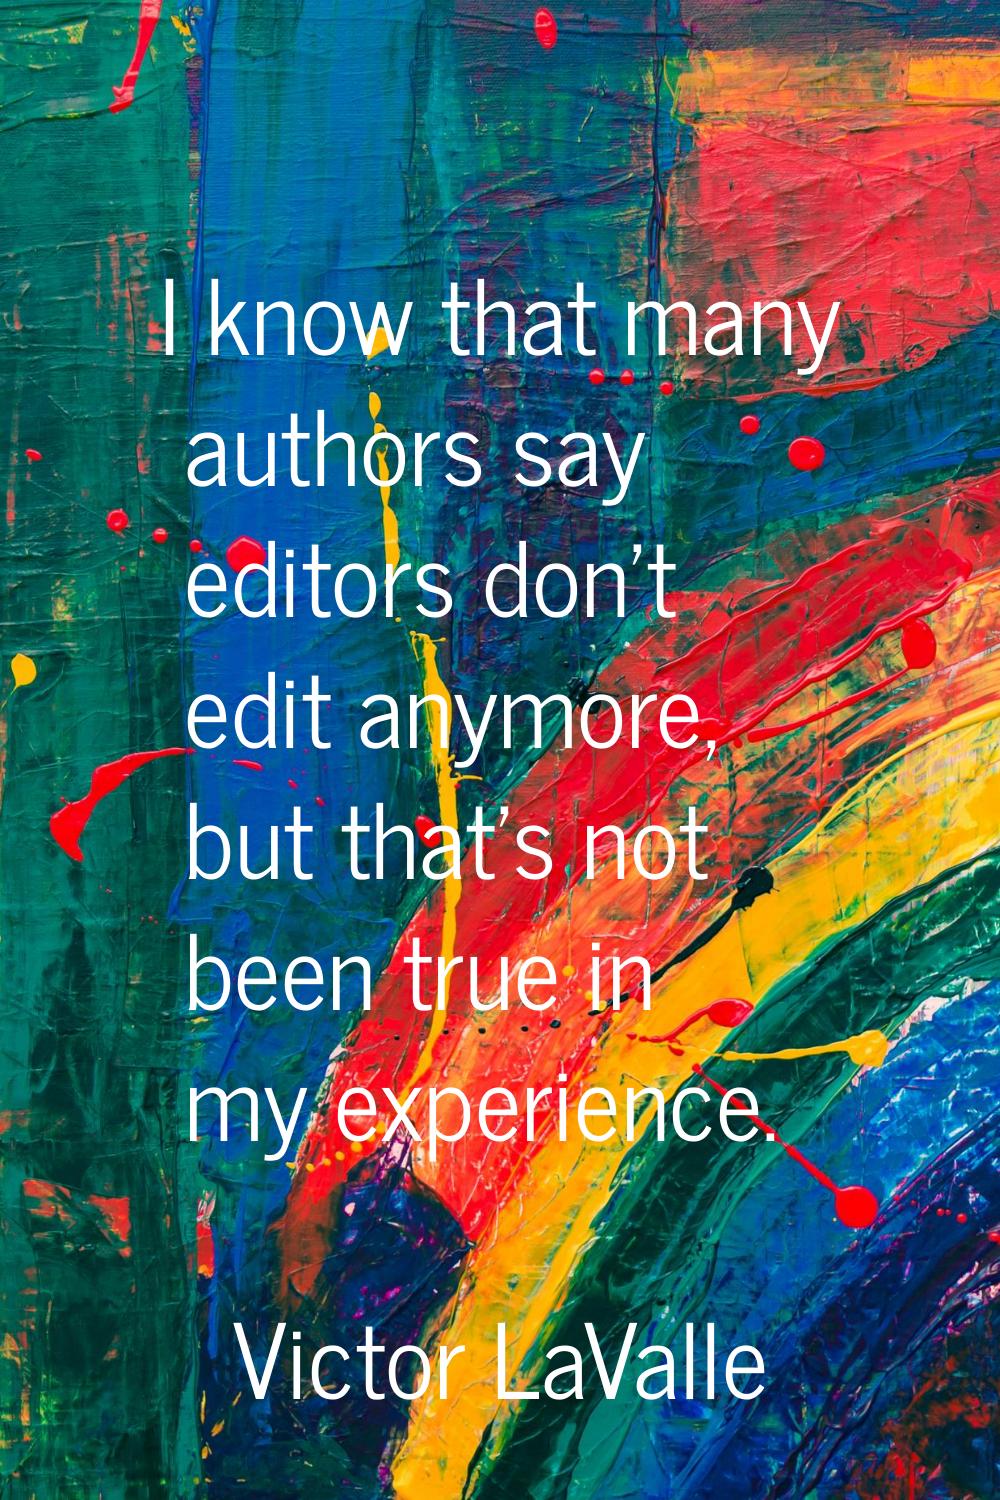 I know that many authors say editors don't edit anymore, but that's not been true in my experience.